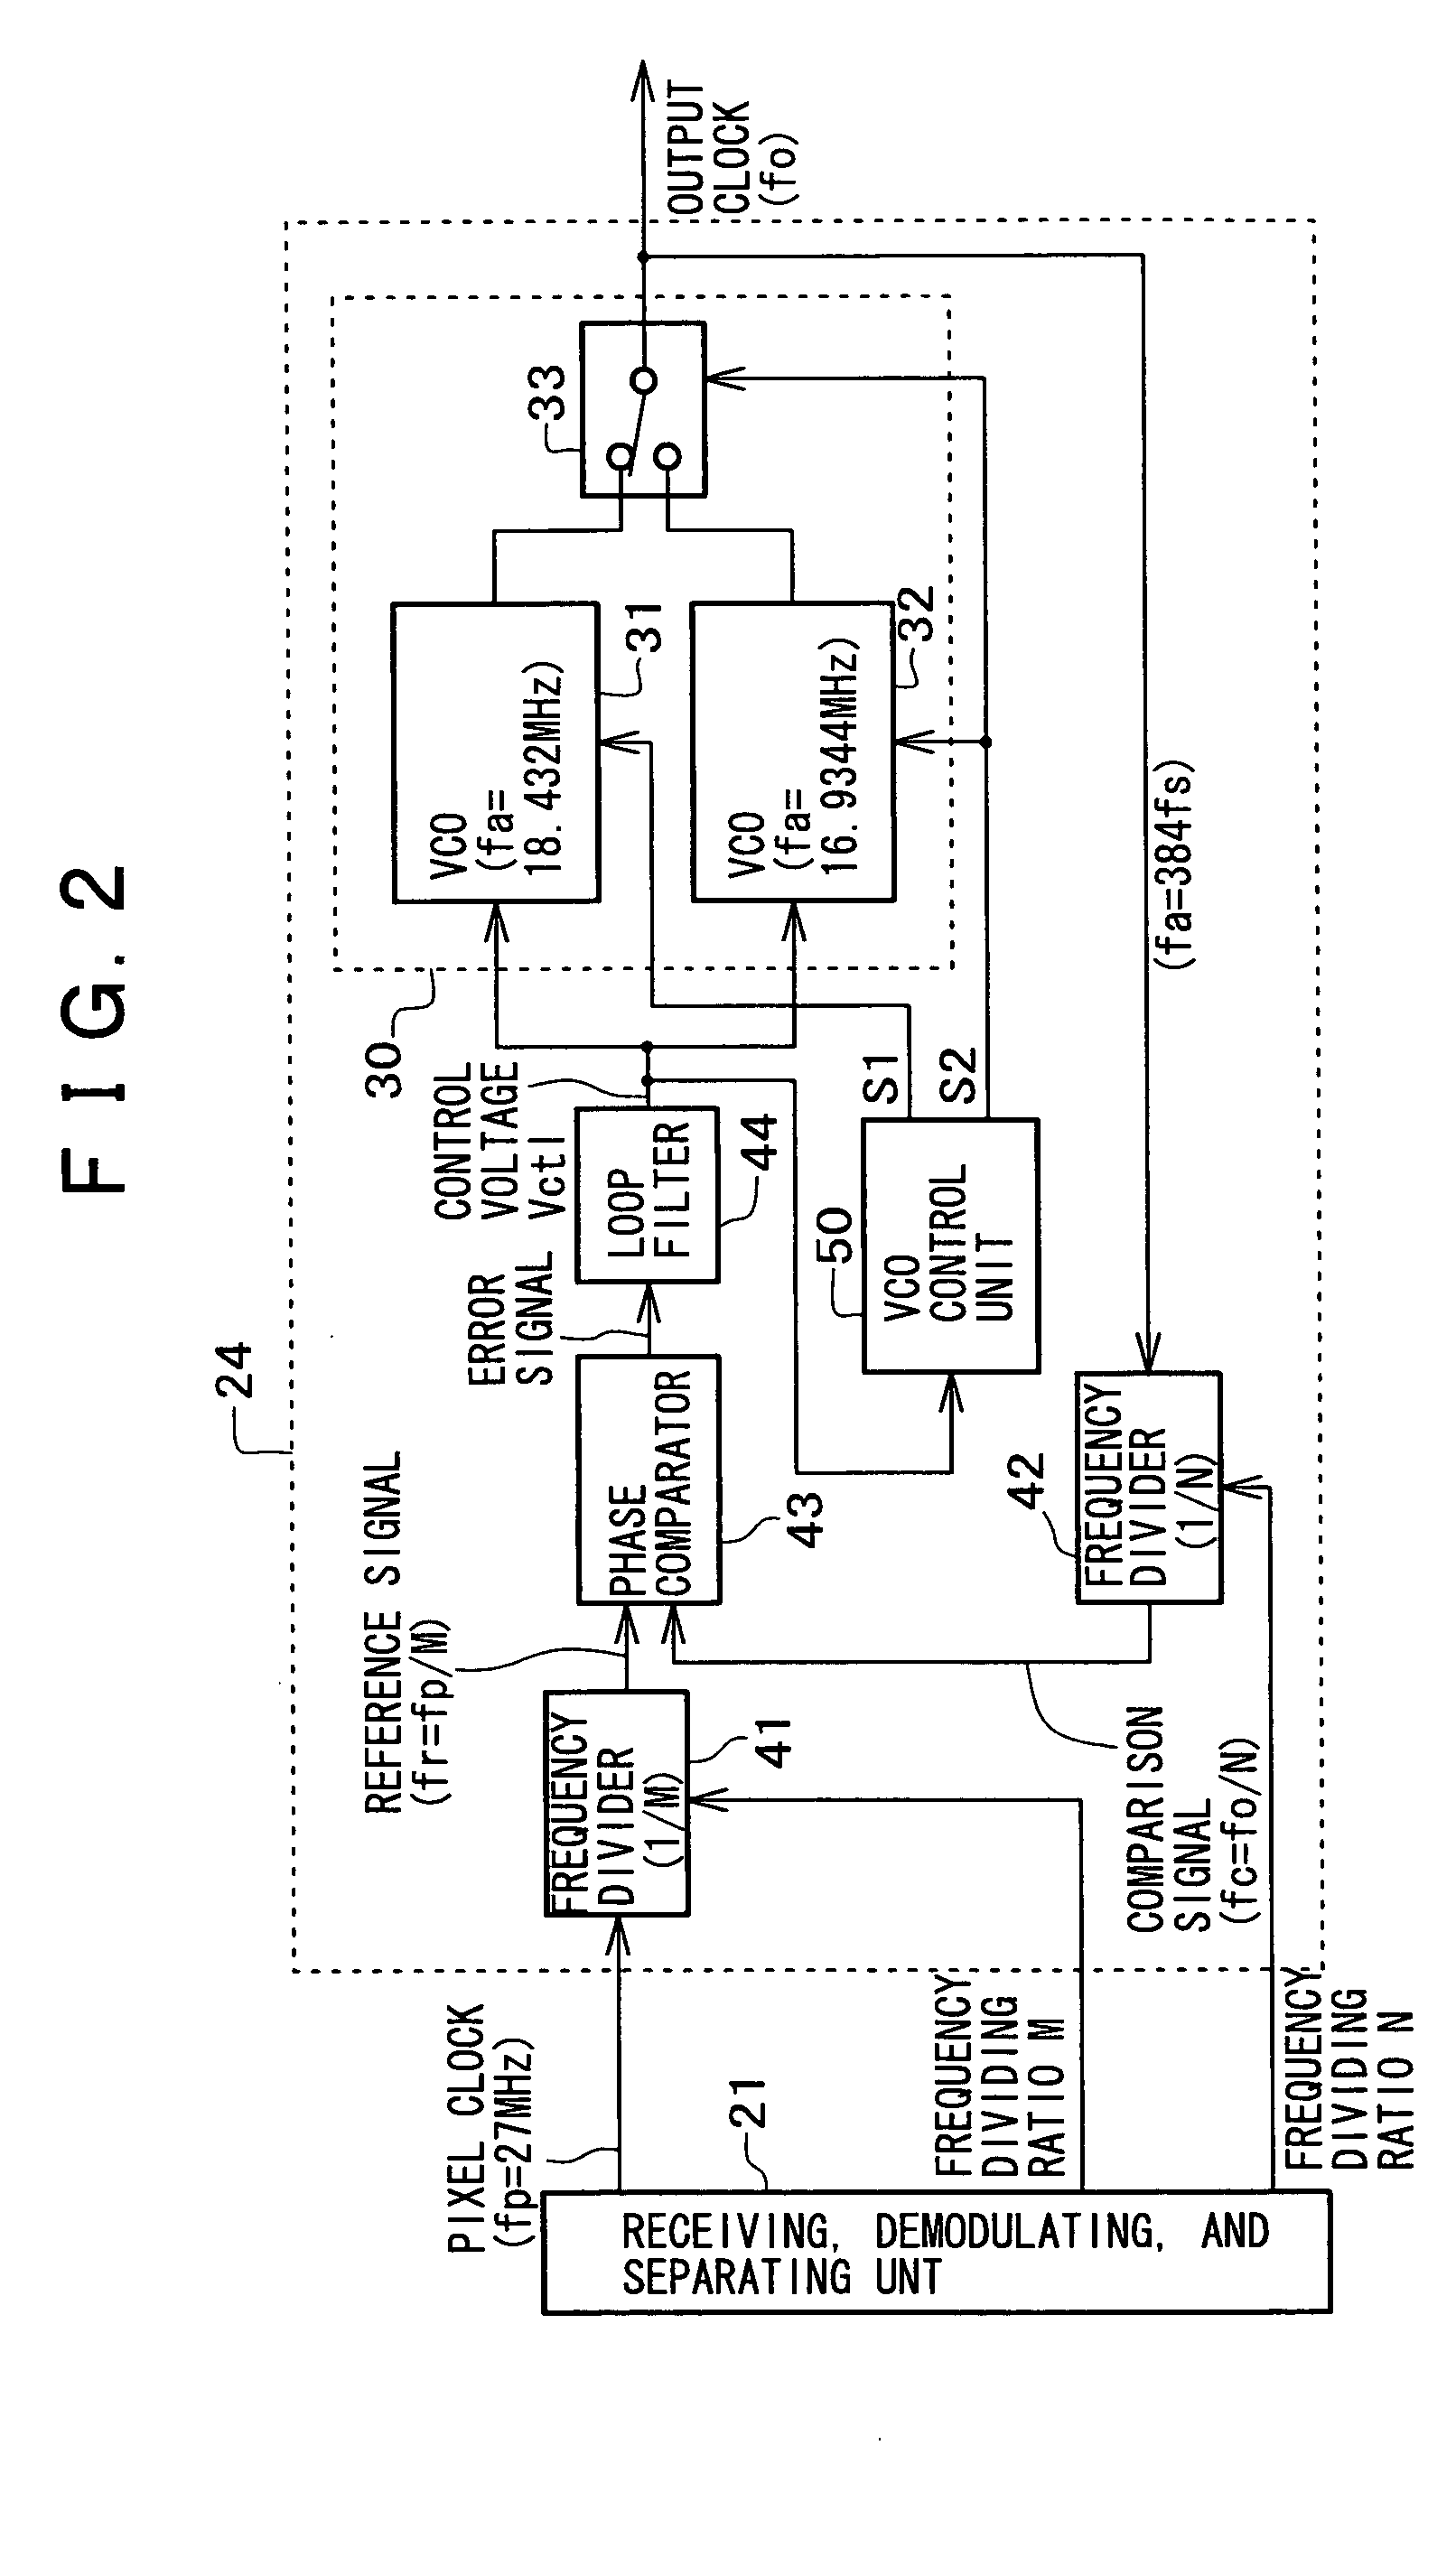 Digital transmission system and clock reproducing device